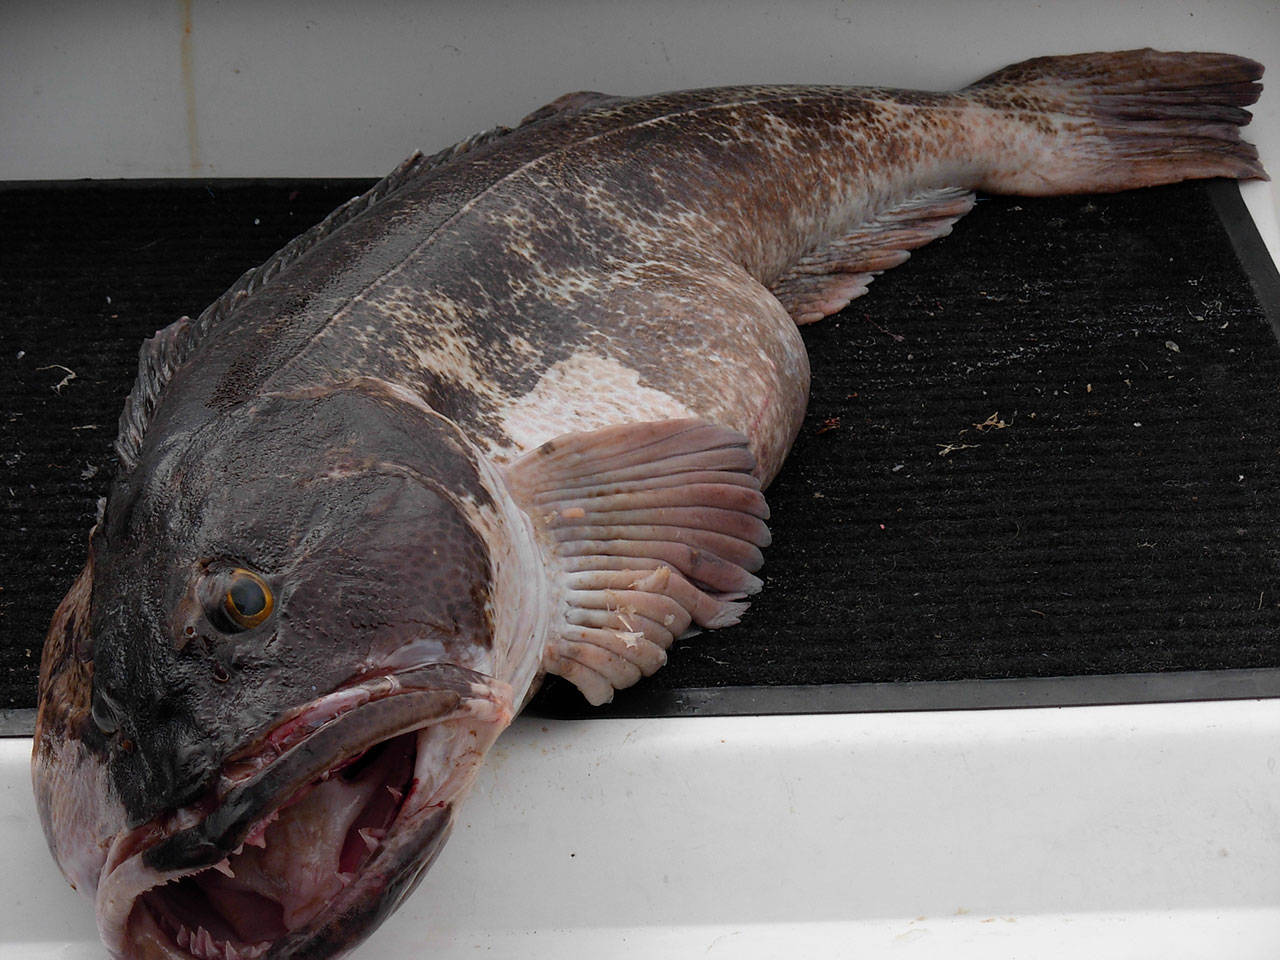 Lingcod season starts Monday, May 1 in Puget Sound waters. Nicknamed “bucketheads,” the bottom fish are considered excellent tablefare. Photo courtesy of Washington Department of Fish and Wildlife